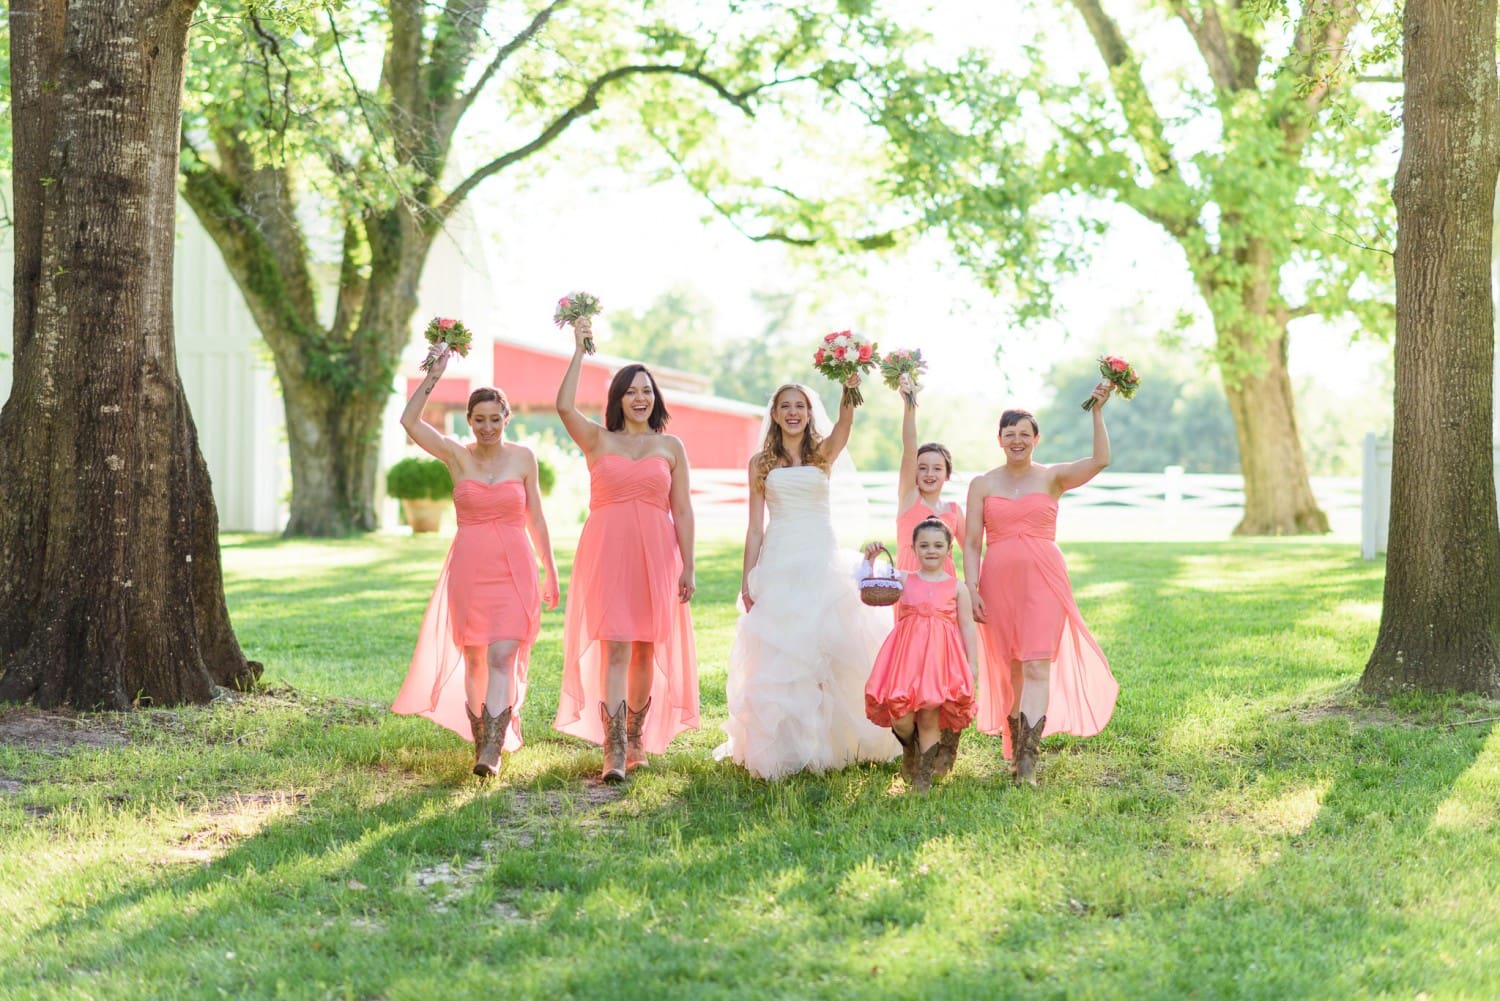 Bridesmaids holding flowers in the air - Wildberry Farm